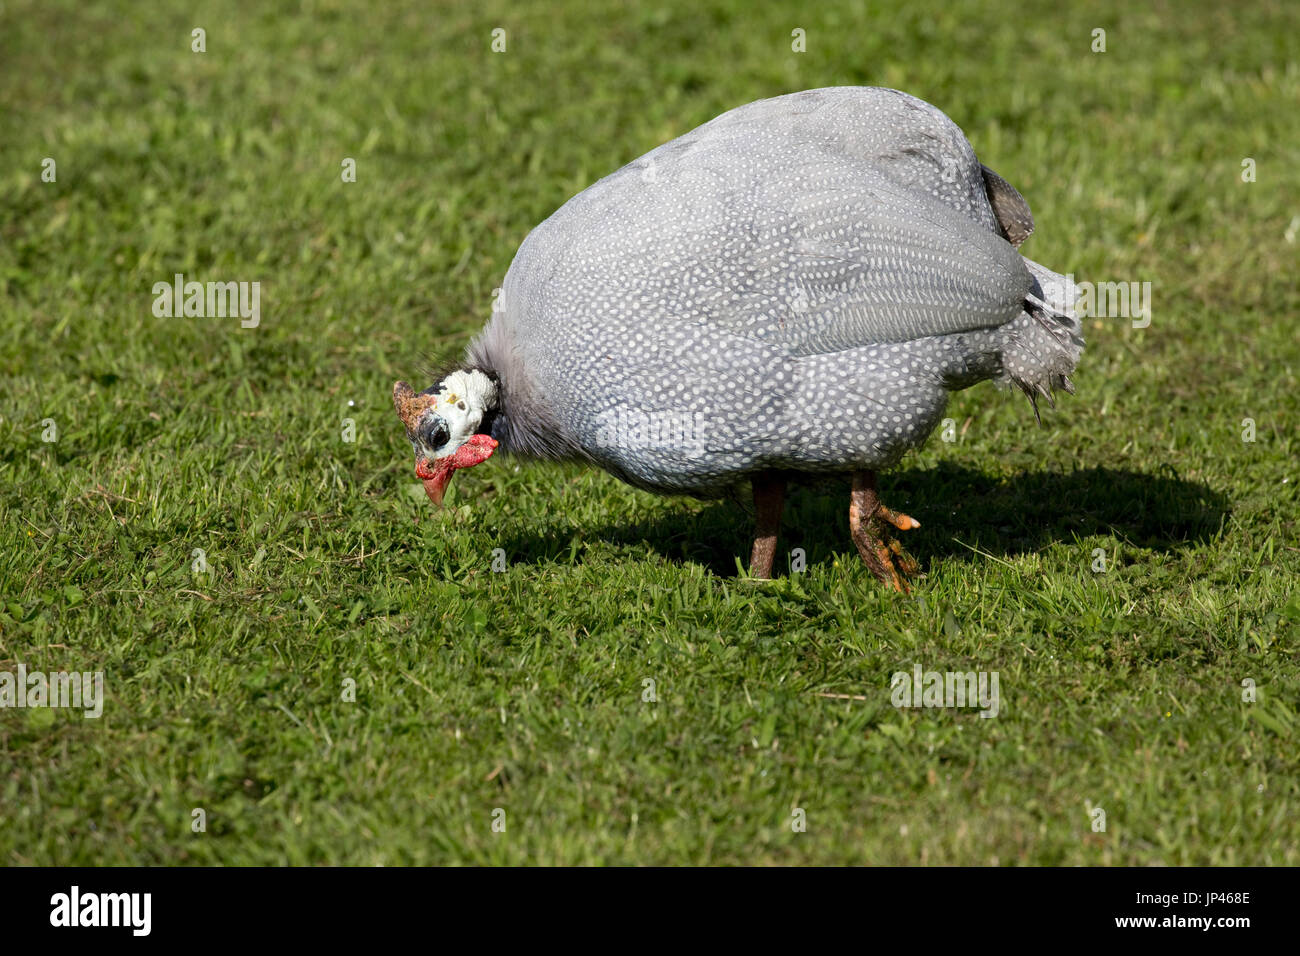 Domestic Guineafowl Stock Photos Domestic Guineafowl Stock Images